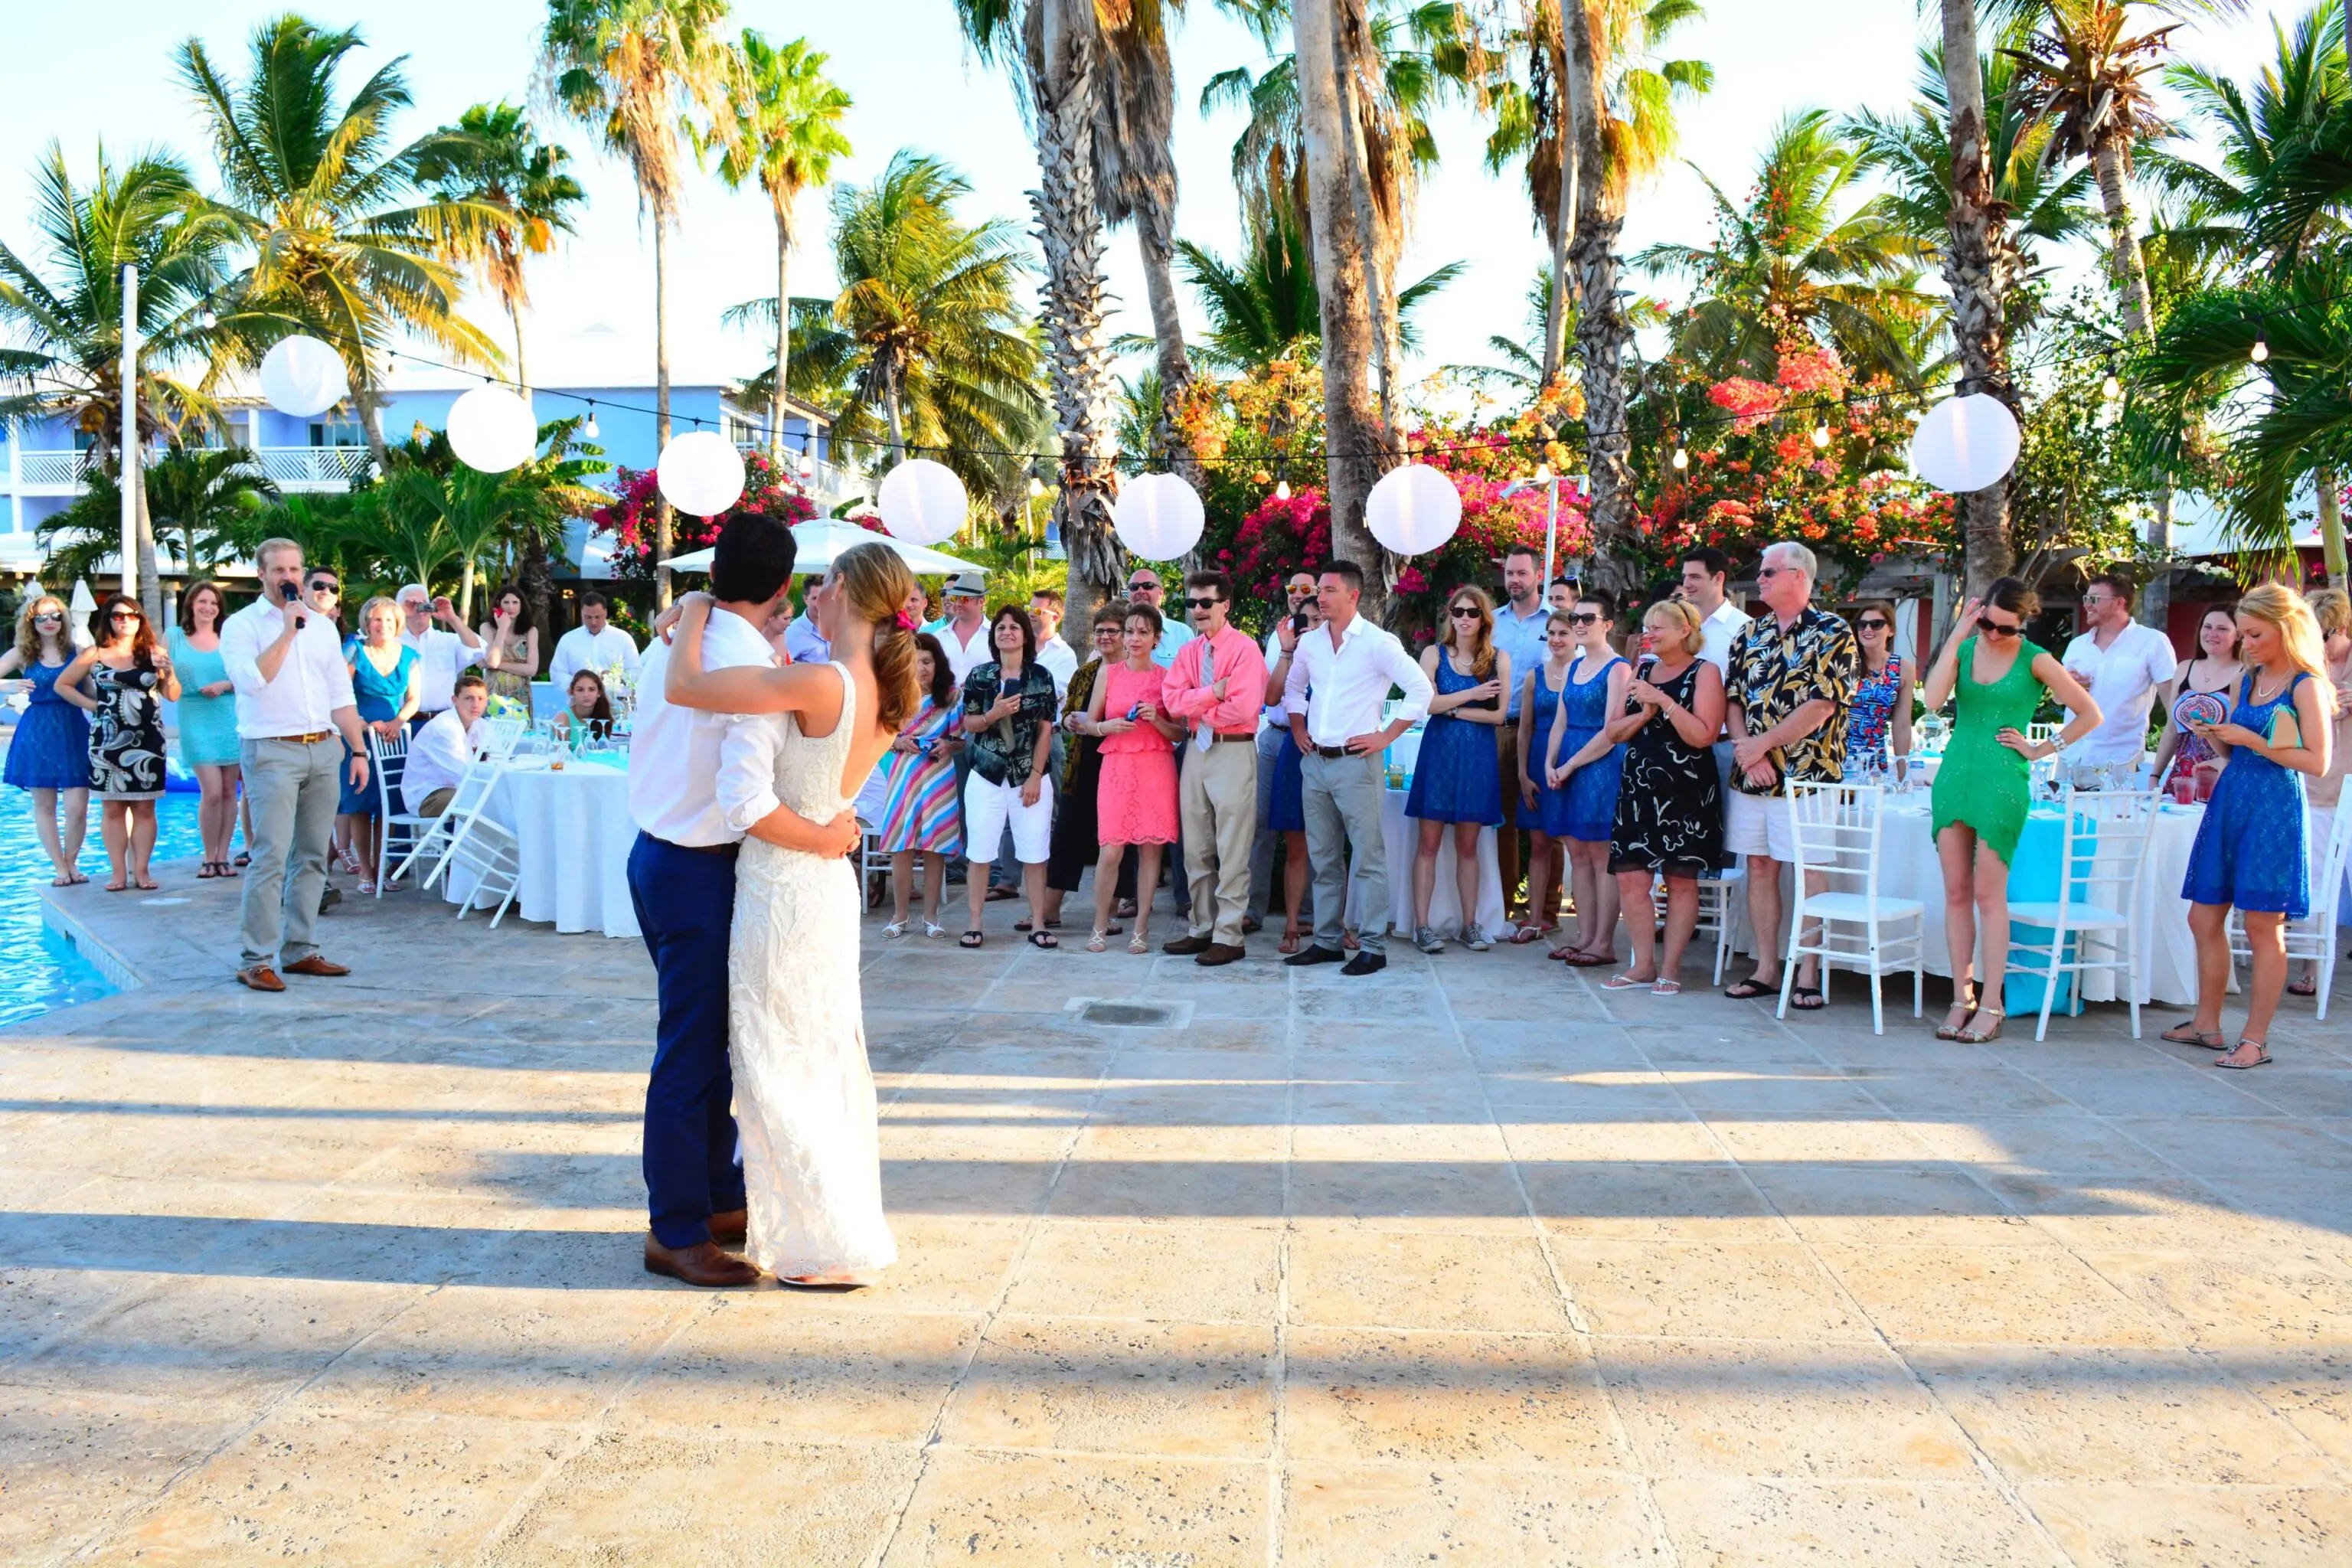 A couple is dancing in front of a crowd.